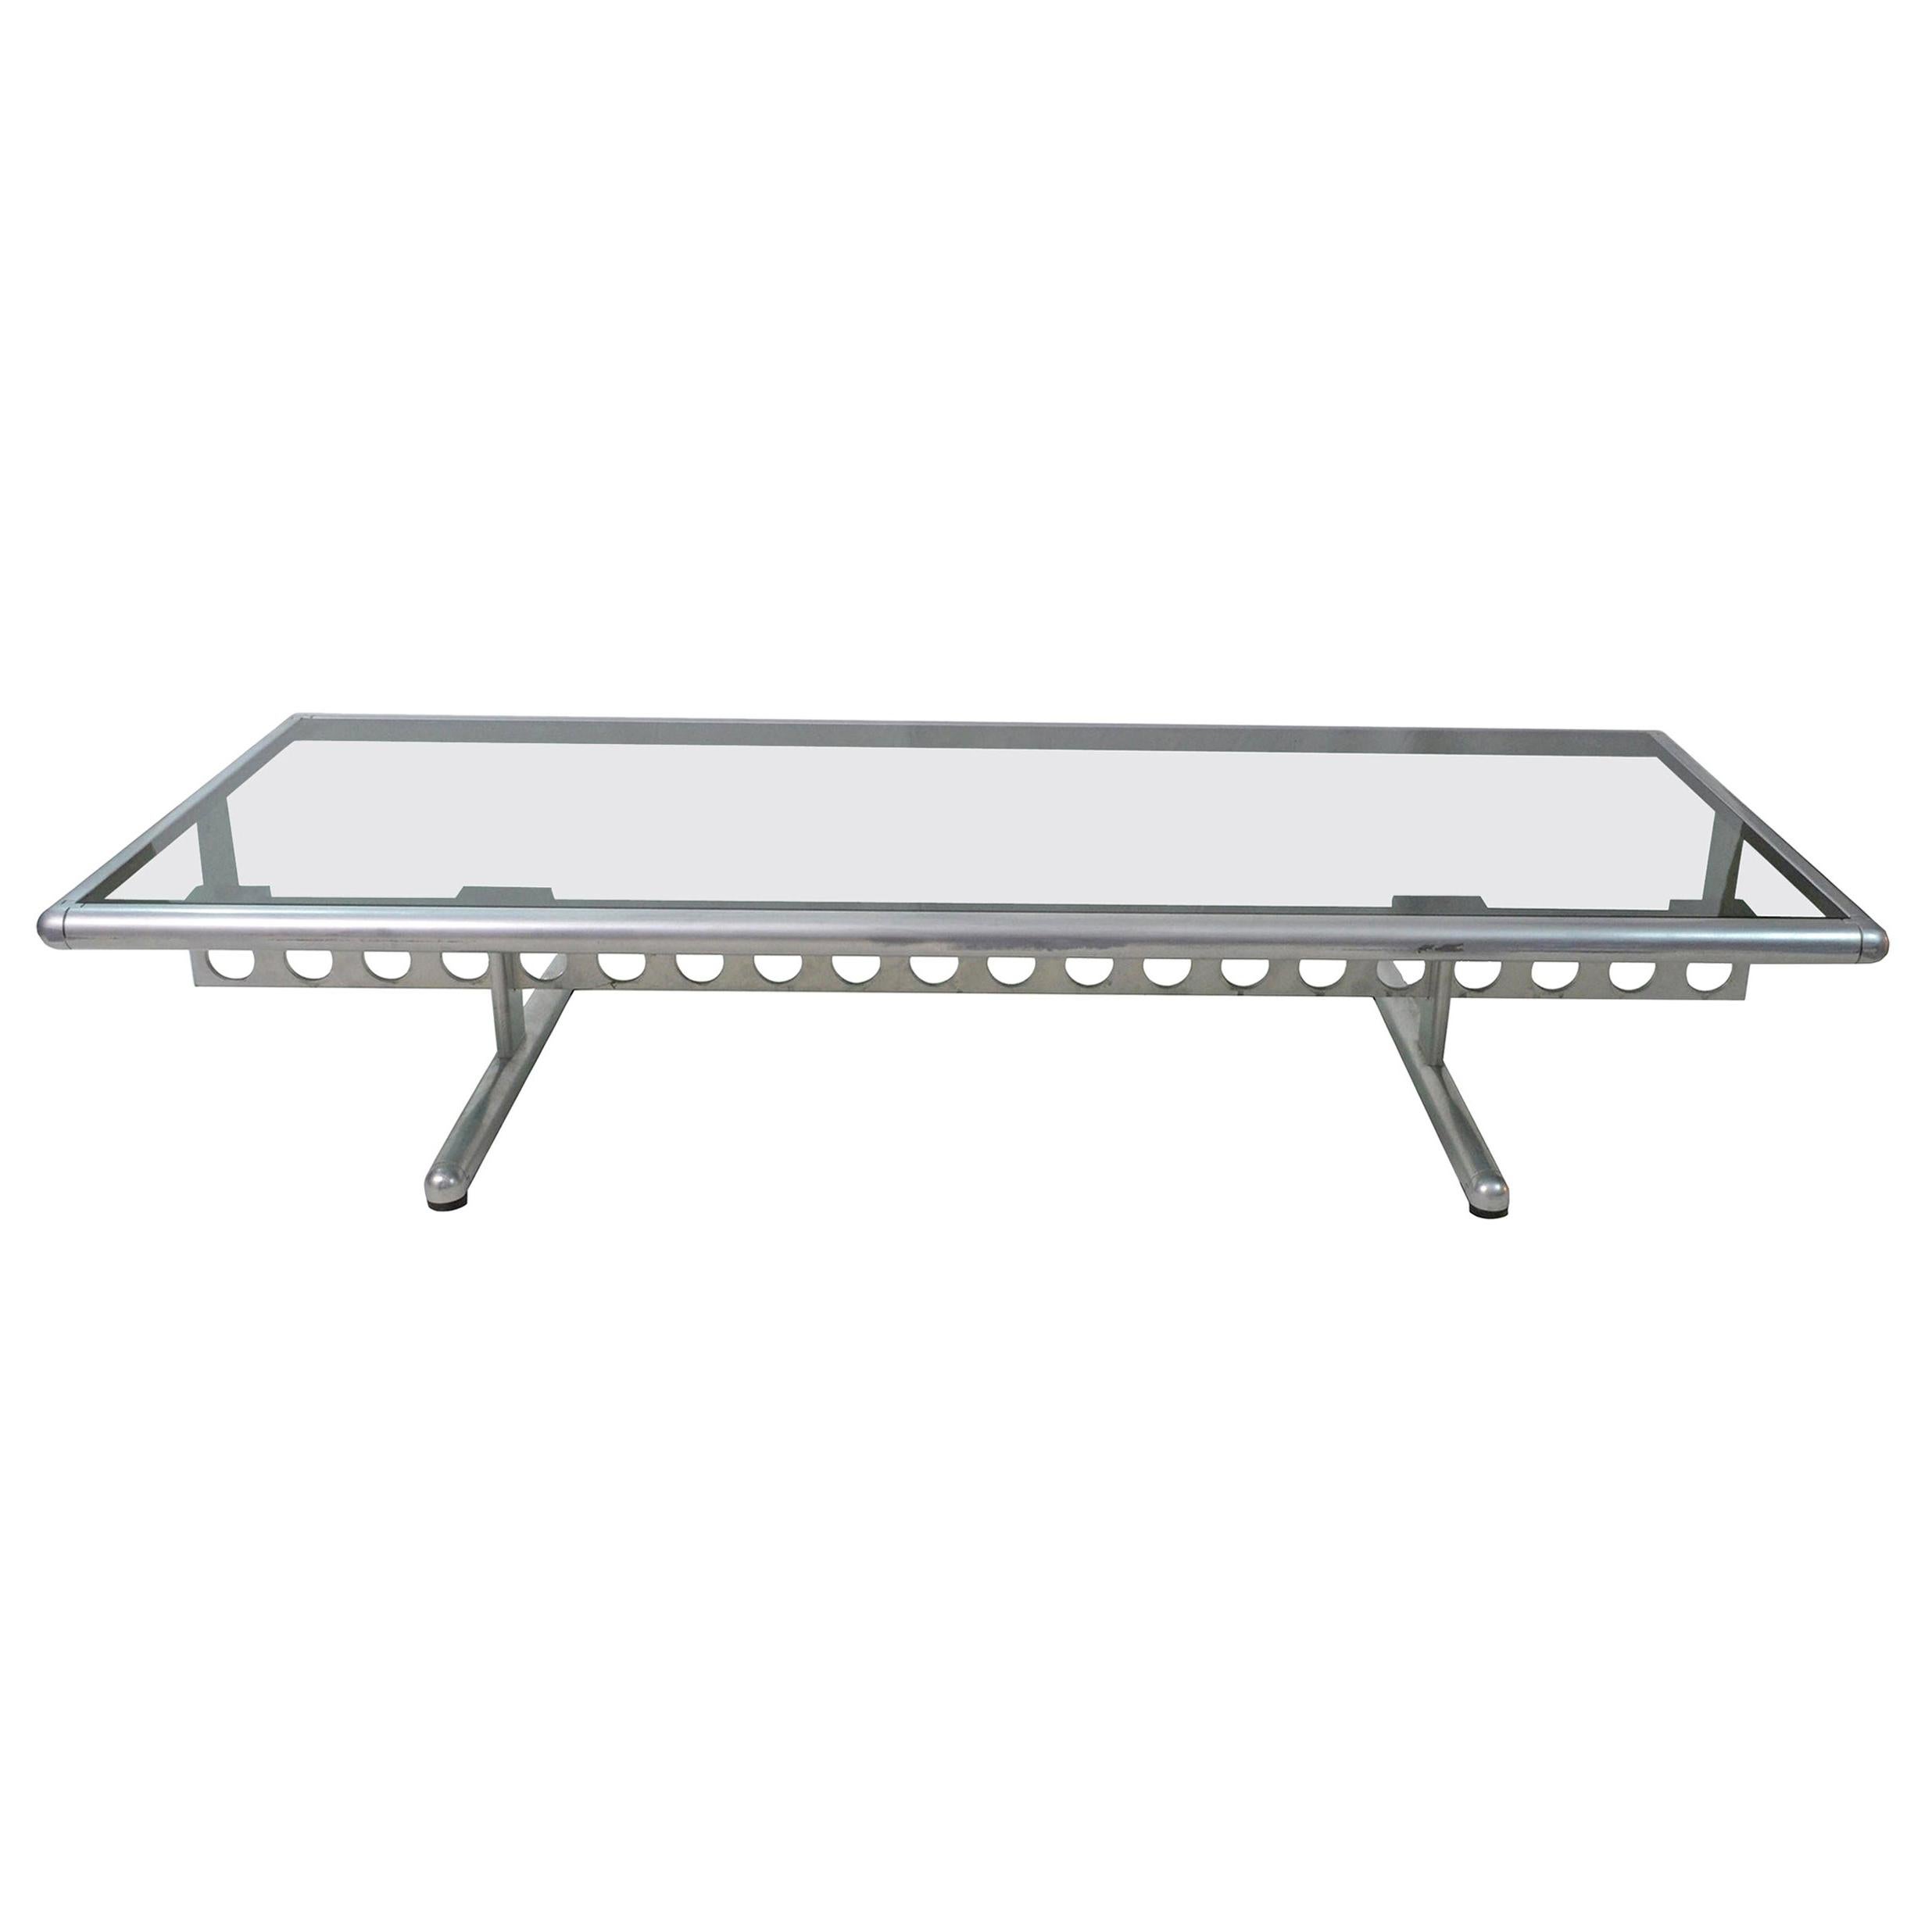 Italian Chromed Steel and Smoked Glass Ouverture Coffee Table for Frau, 1980s For Sale